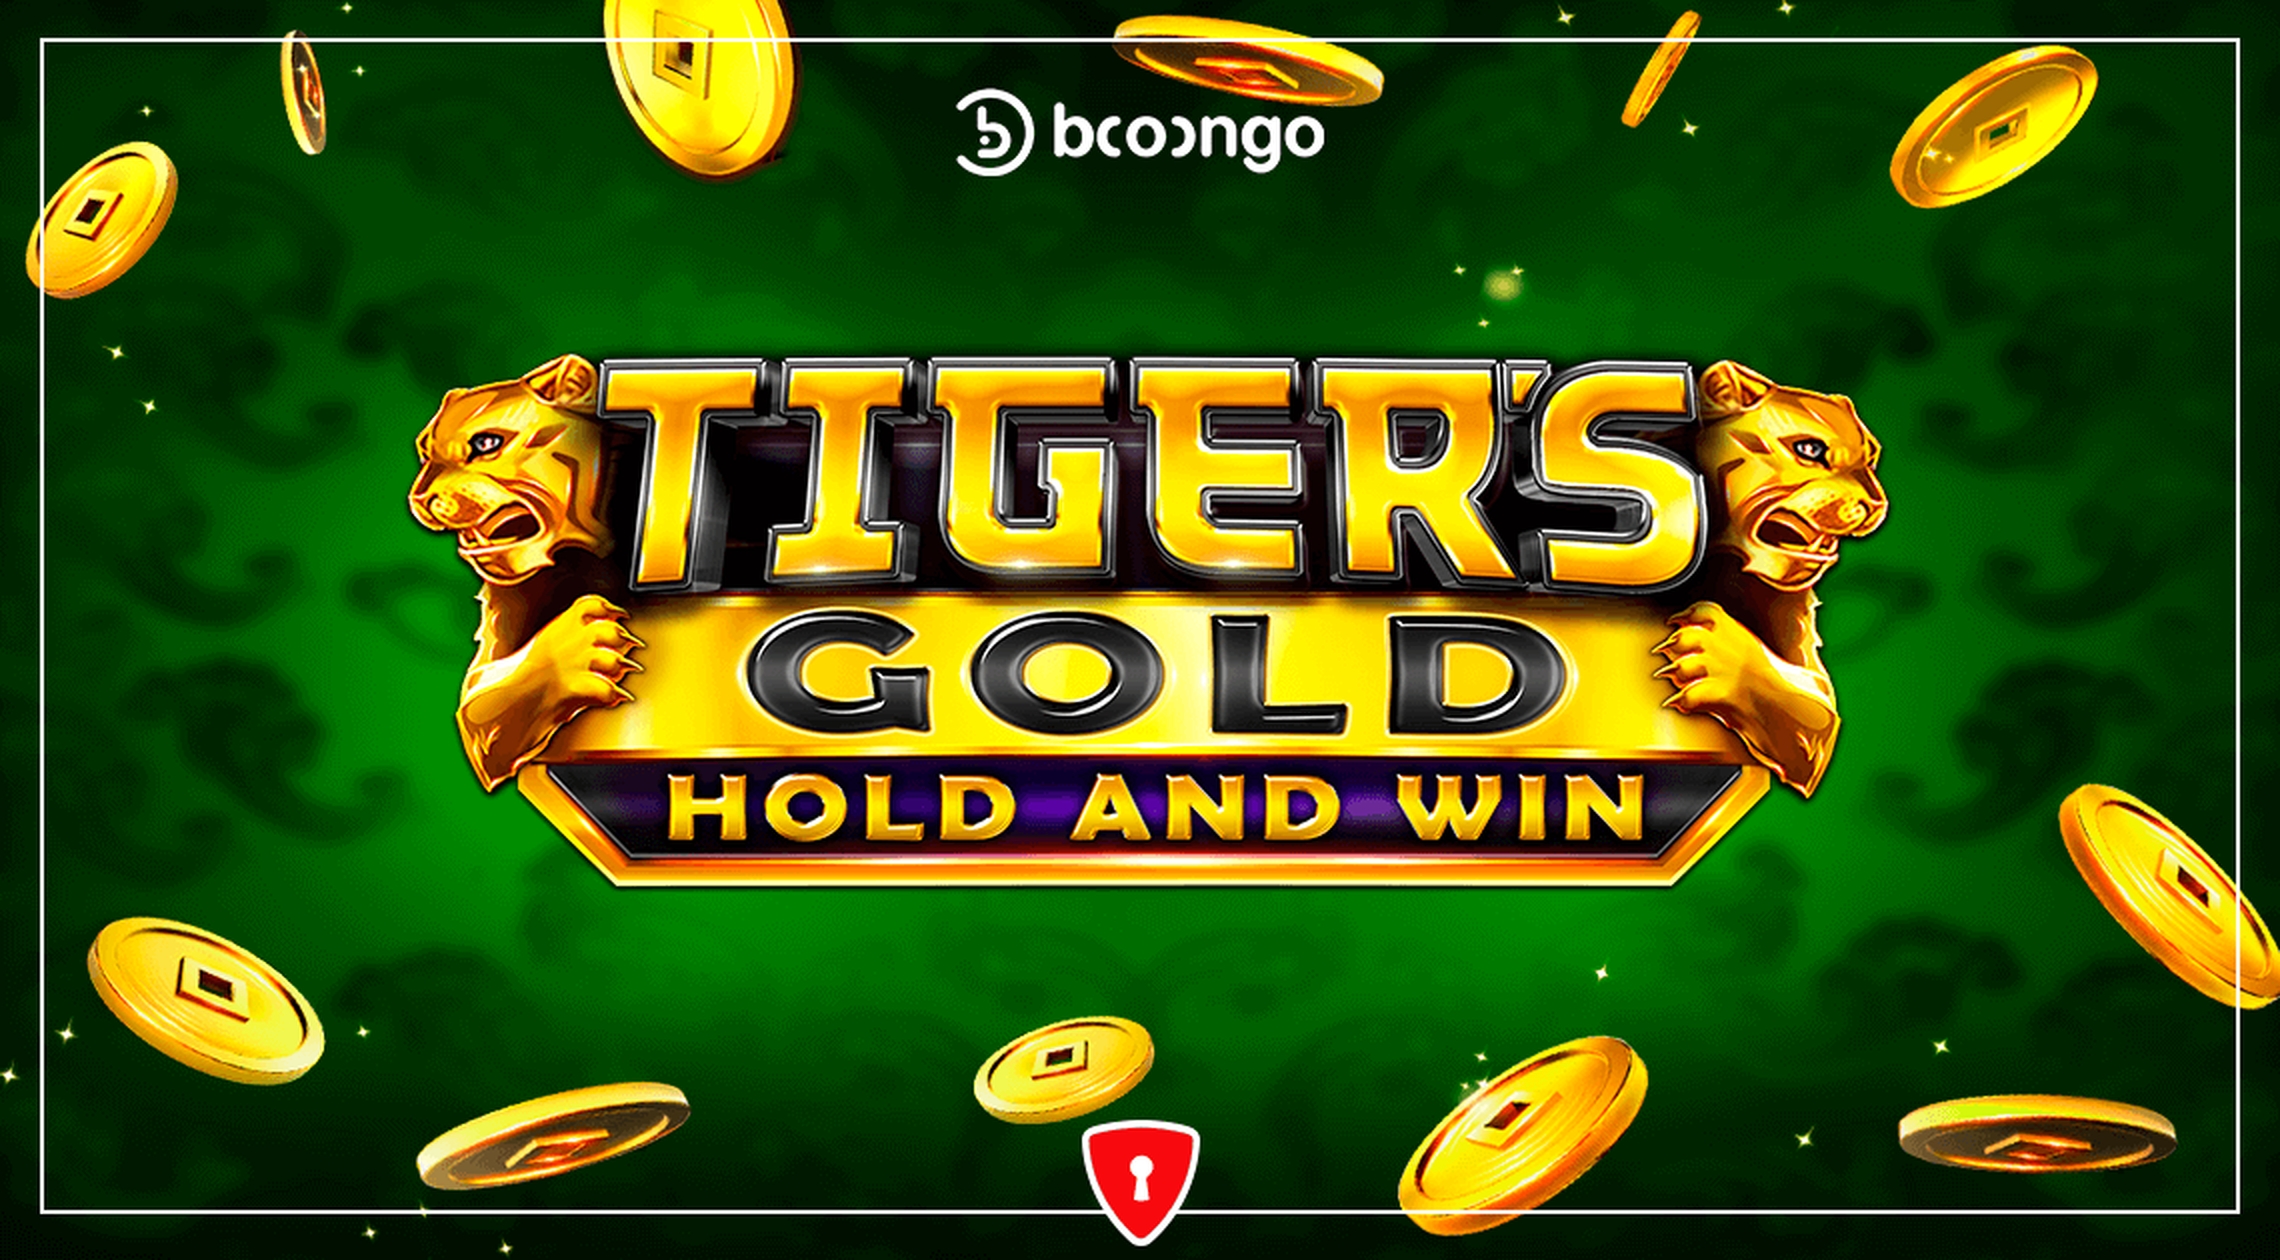 Tiger's Gold Hold and Win demo